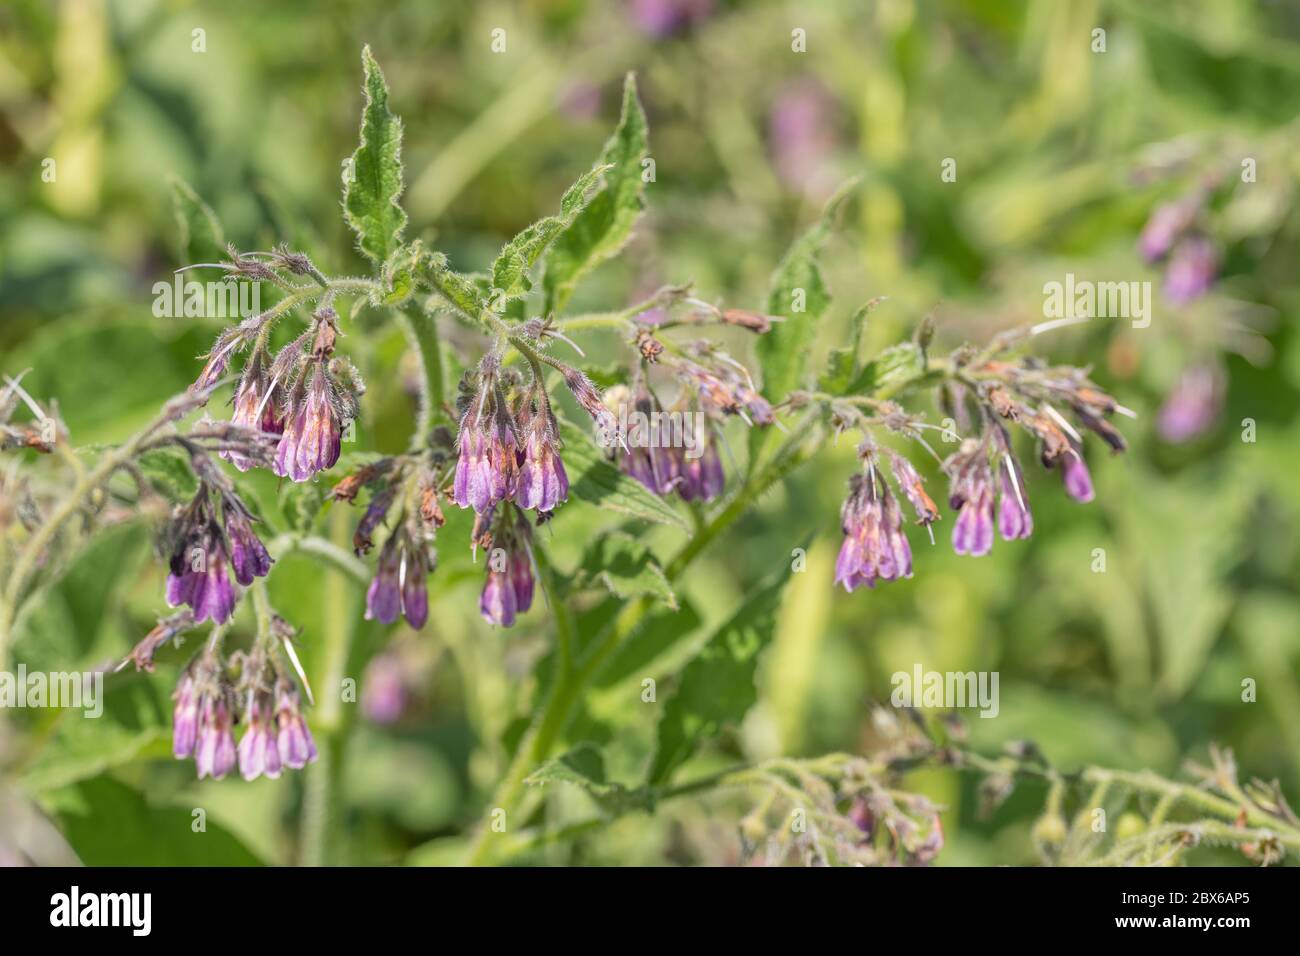 Mass of flowering Comfrey / Symphytum officinale flowers on a sunny summer day. Used as a herbal / medicinal plant and known as Bone-kit. Stock Photo